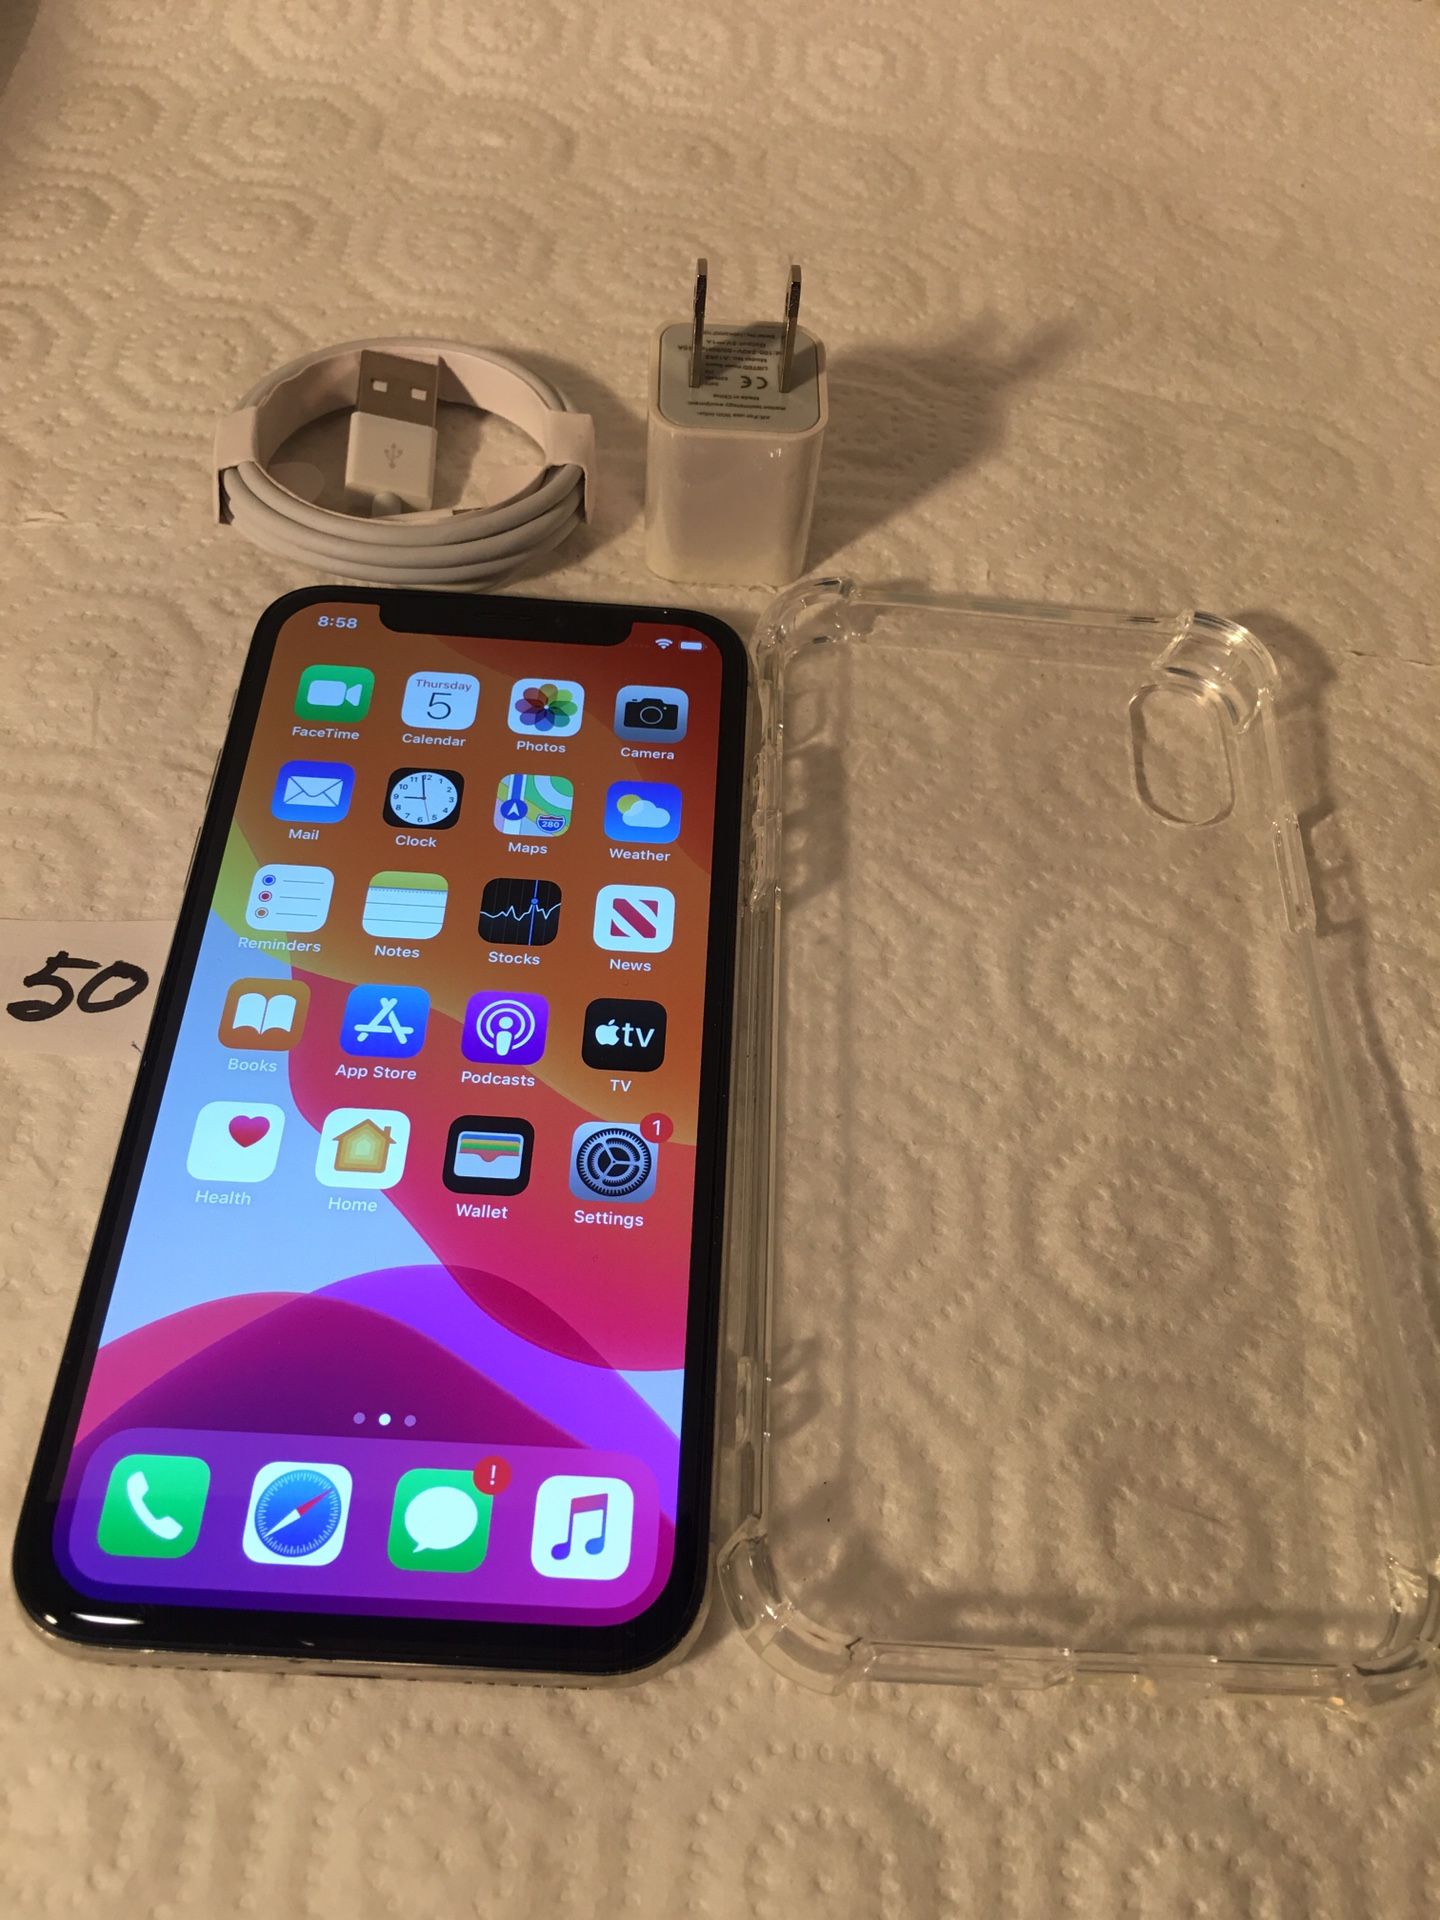 Apple iPhone X-64gb,A1901,Silver/Black,America Mobil,(Tracfone,Safelink,Straight TALK,Total Wireless),Clean iCloud, Fully Functional,Mint Conditions.